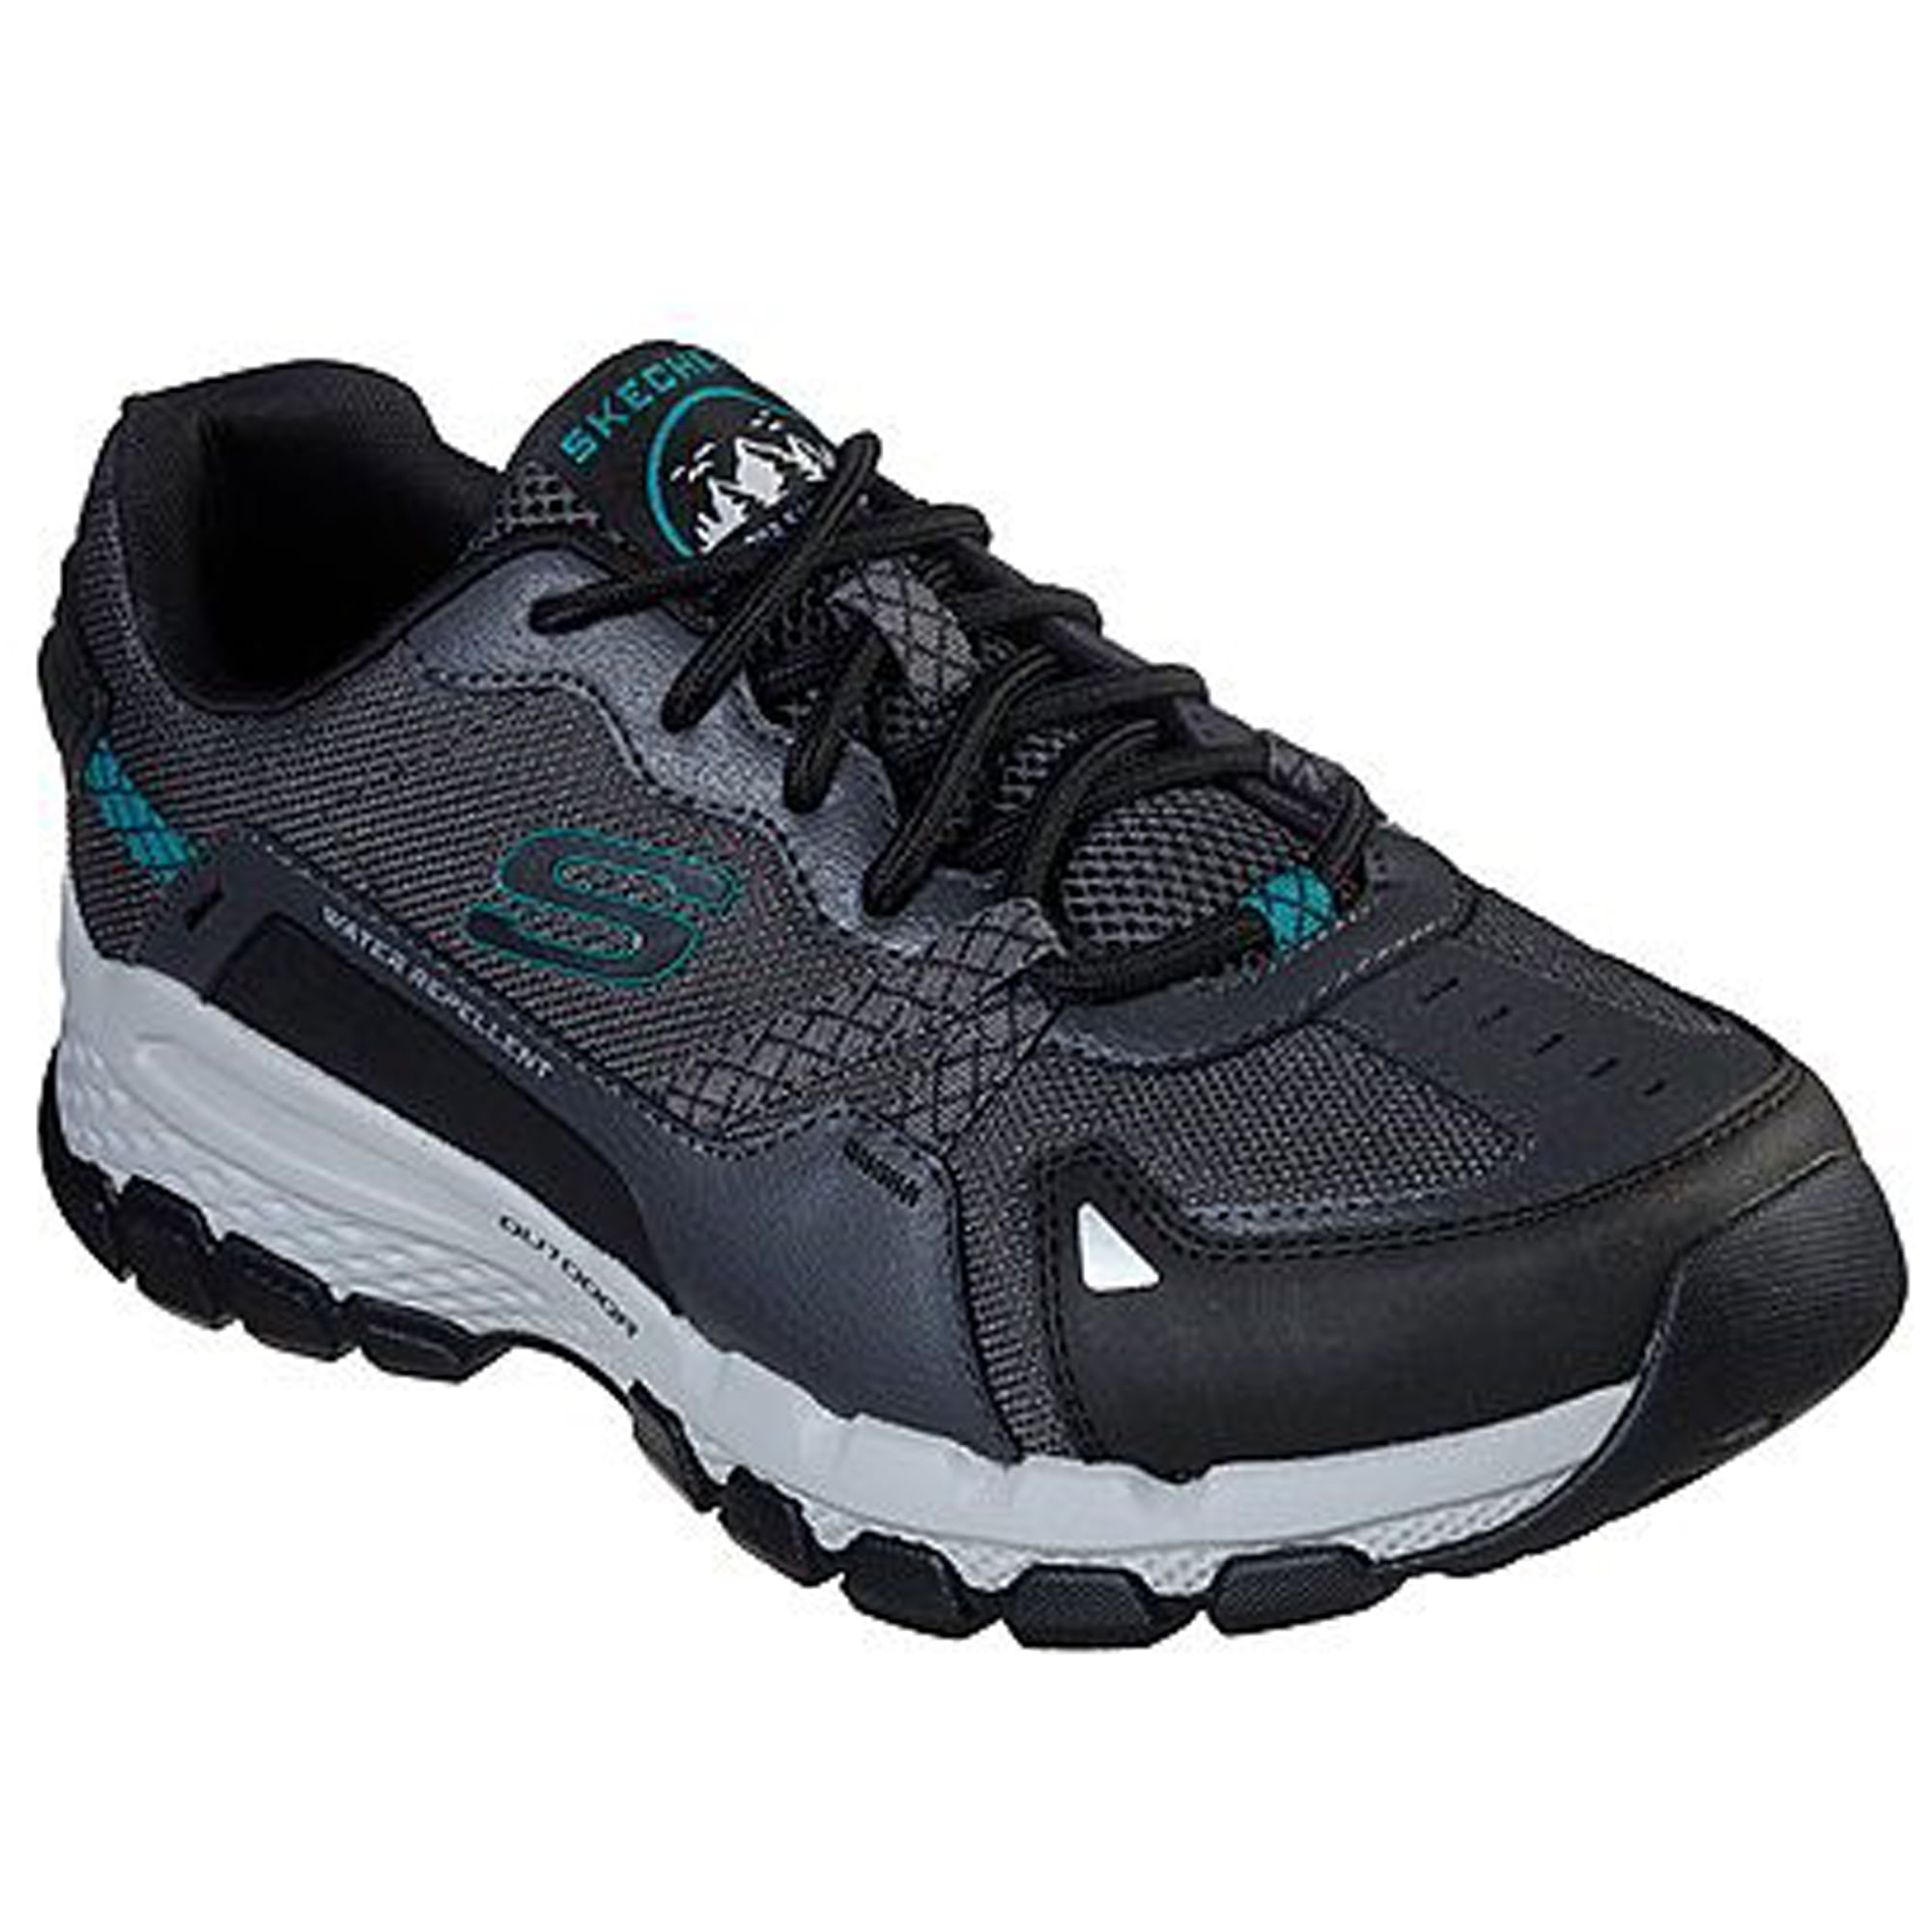 TENIS PARA HOMBRE SKECHERS RELAXED FIT OUTLAND 2.0 NEGRO peopleplays